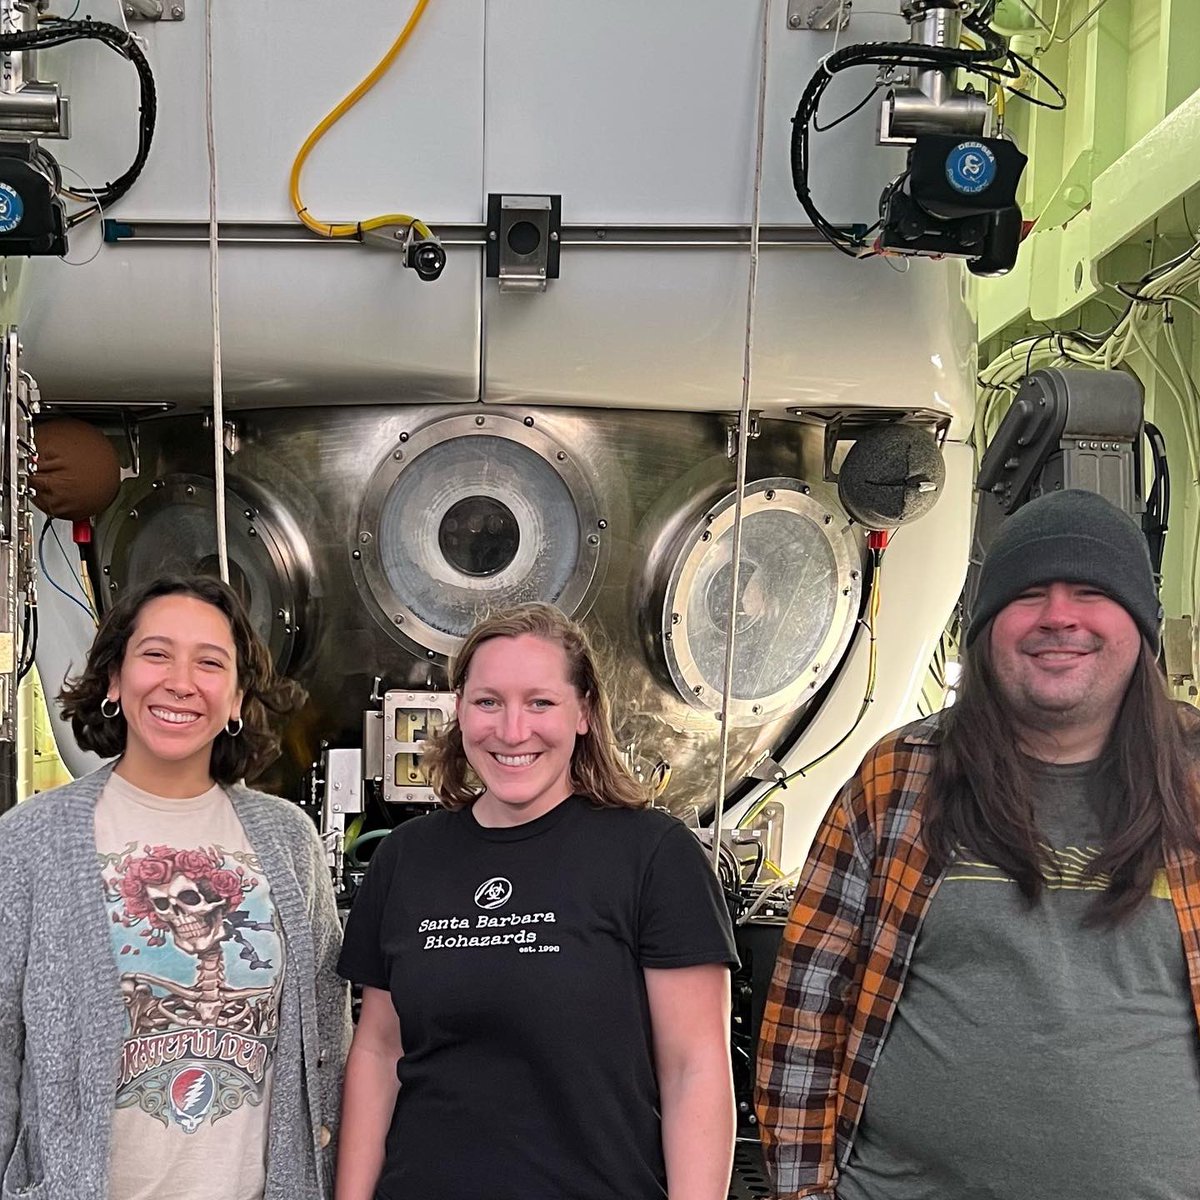 Congratulations to 12 new Alvin divers on our #biofilms4larvae cruise, including three members of the Larval Lab: Vanessa, Tanika, and Wyatt!

Thank you for your hard work as aquanauts and a successful cruise!

#nsffunded @WHOI @DeepSubLab @WWUResearch @WWU